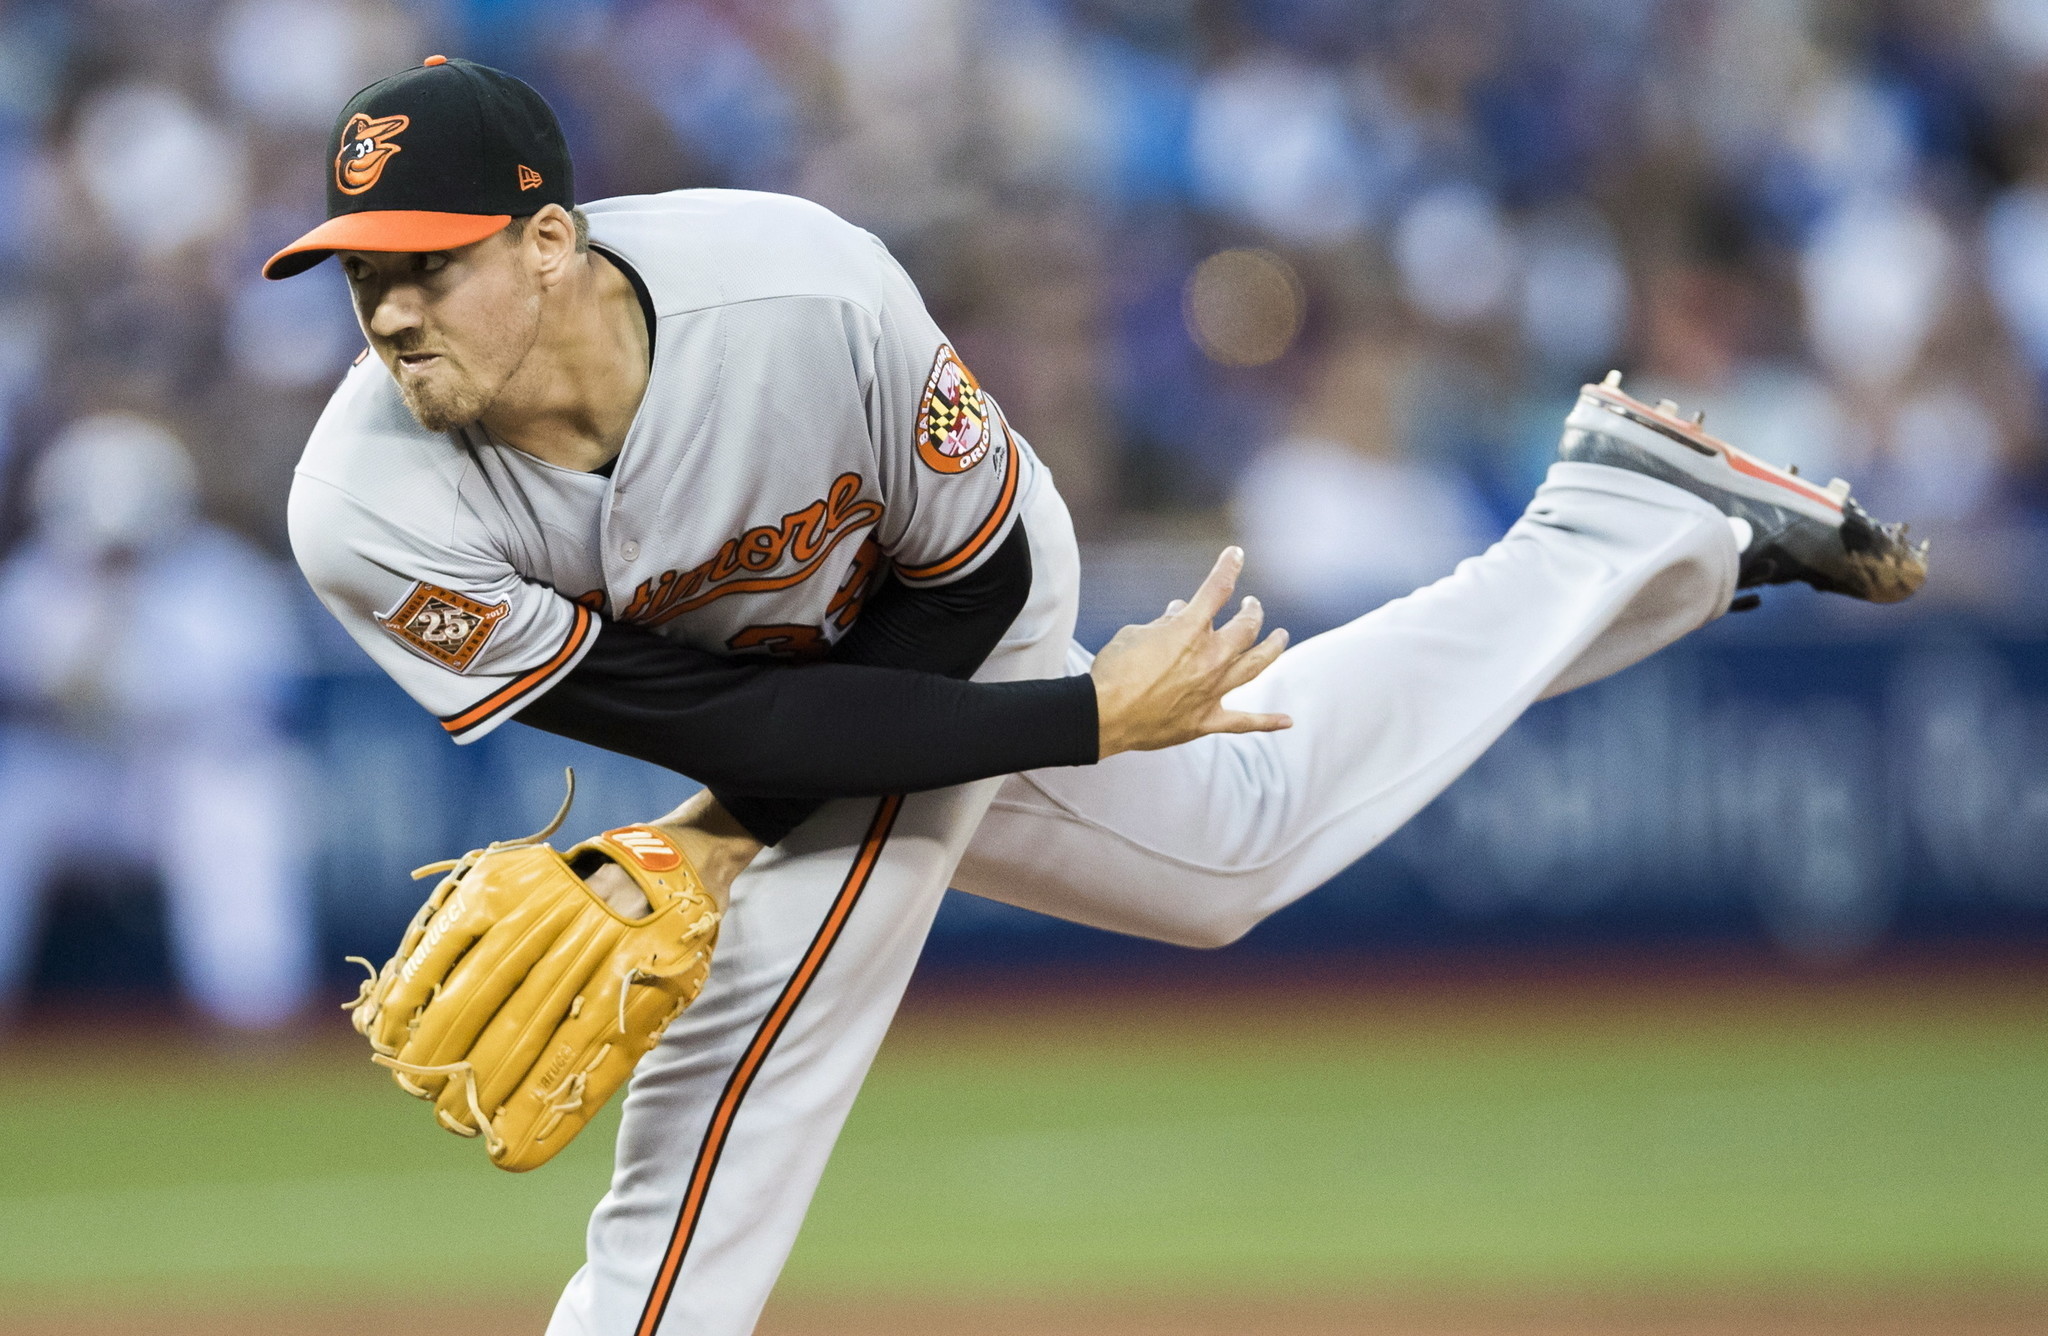 Amid rough season, Orioles' Gausman encouraged by recent success vs. right-handed hitters